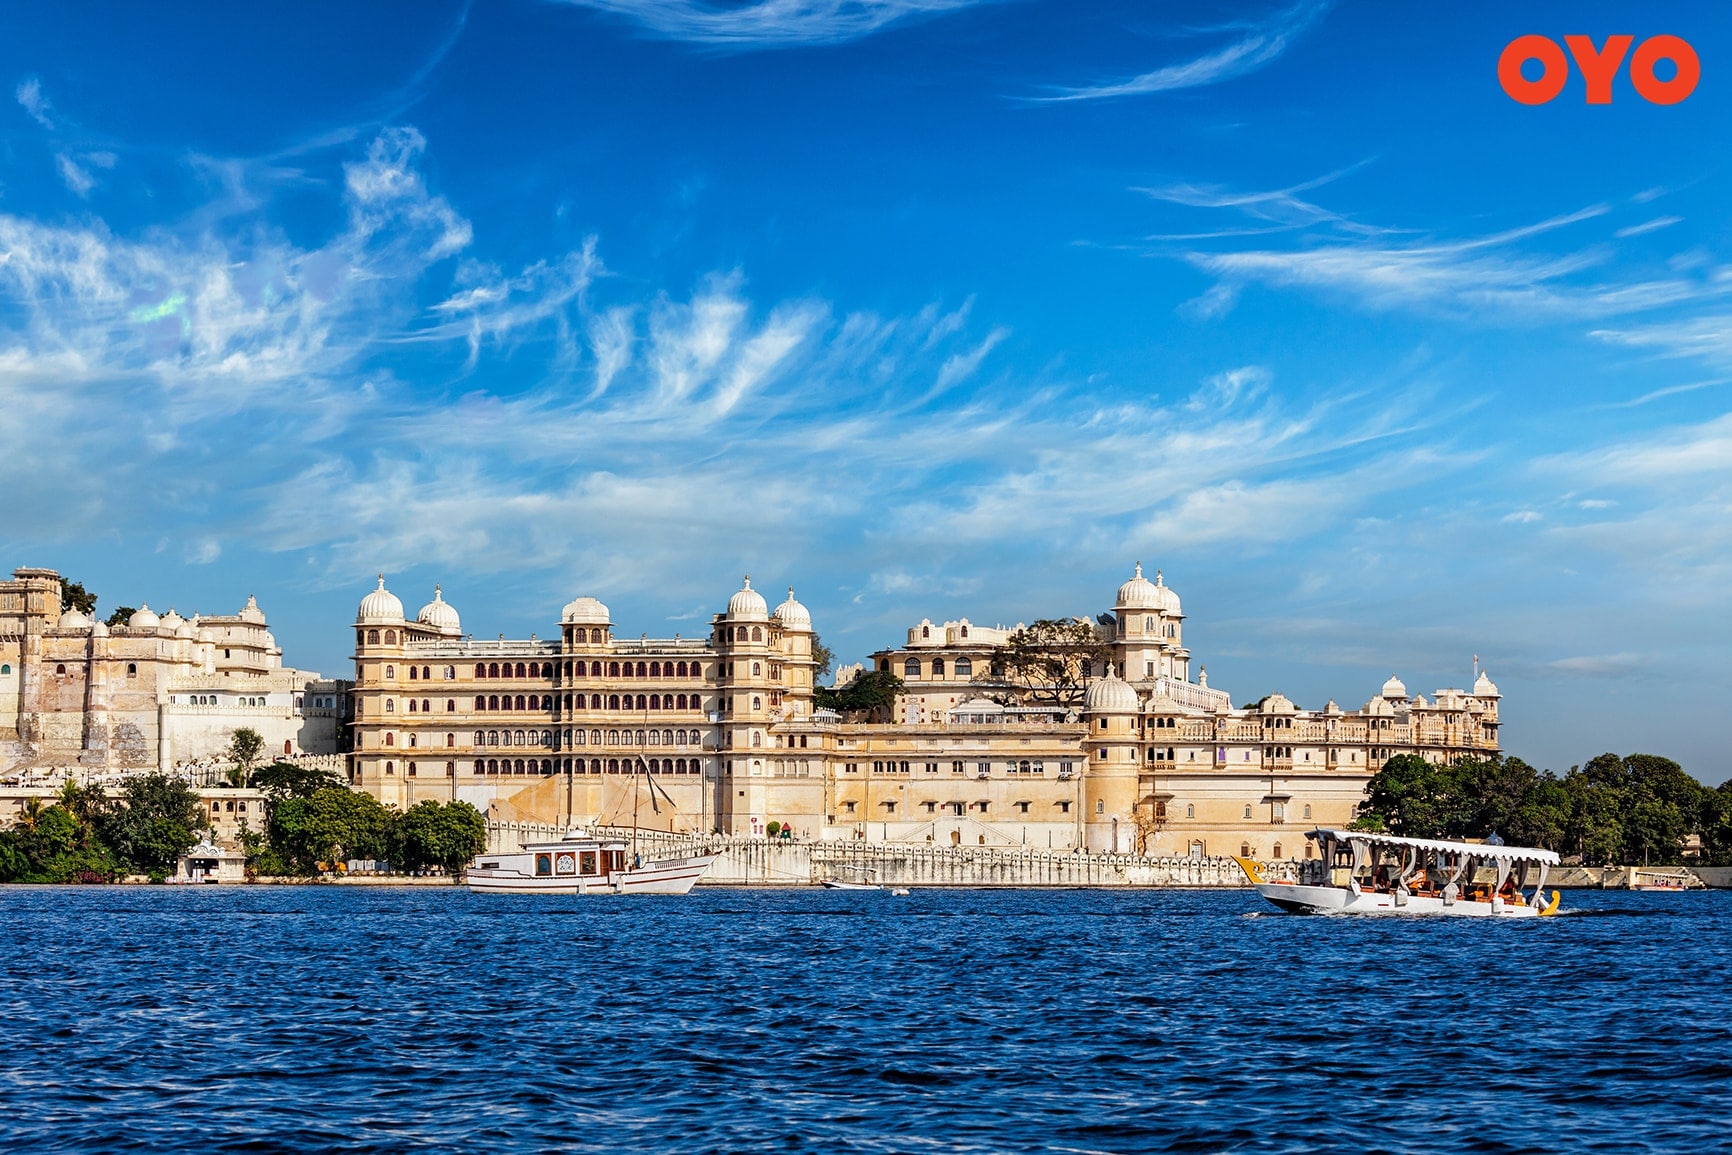 Pichola Lake, Udaipur - one of the famous lakes in India